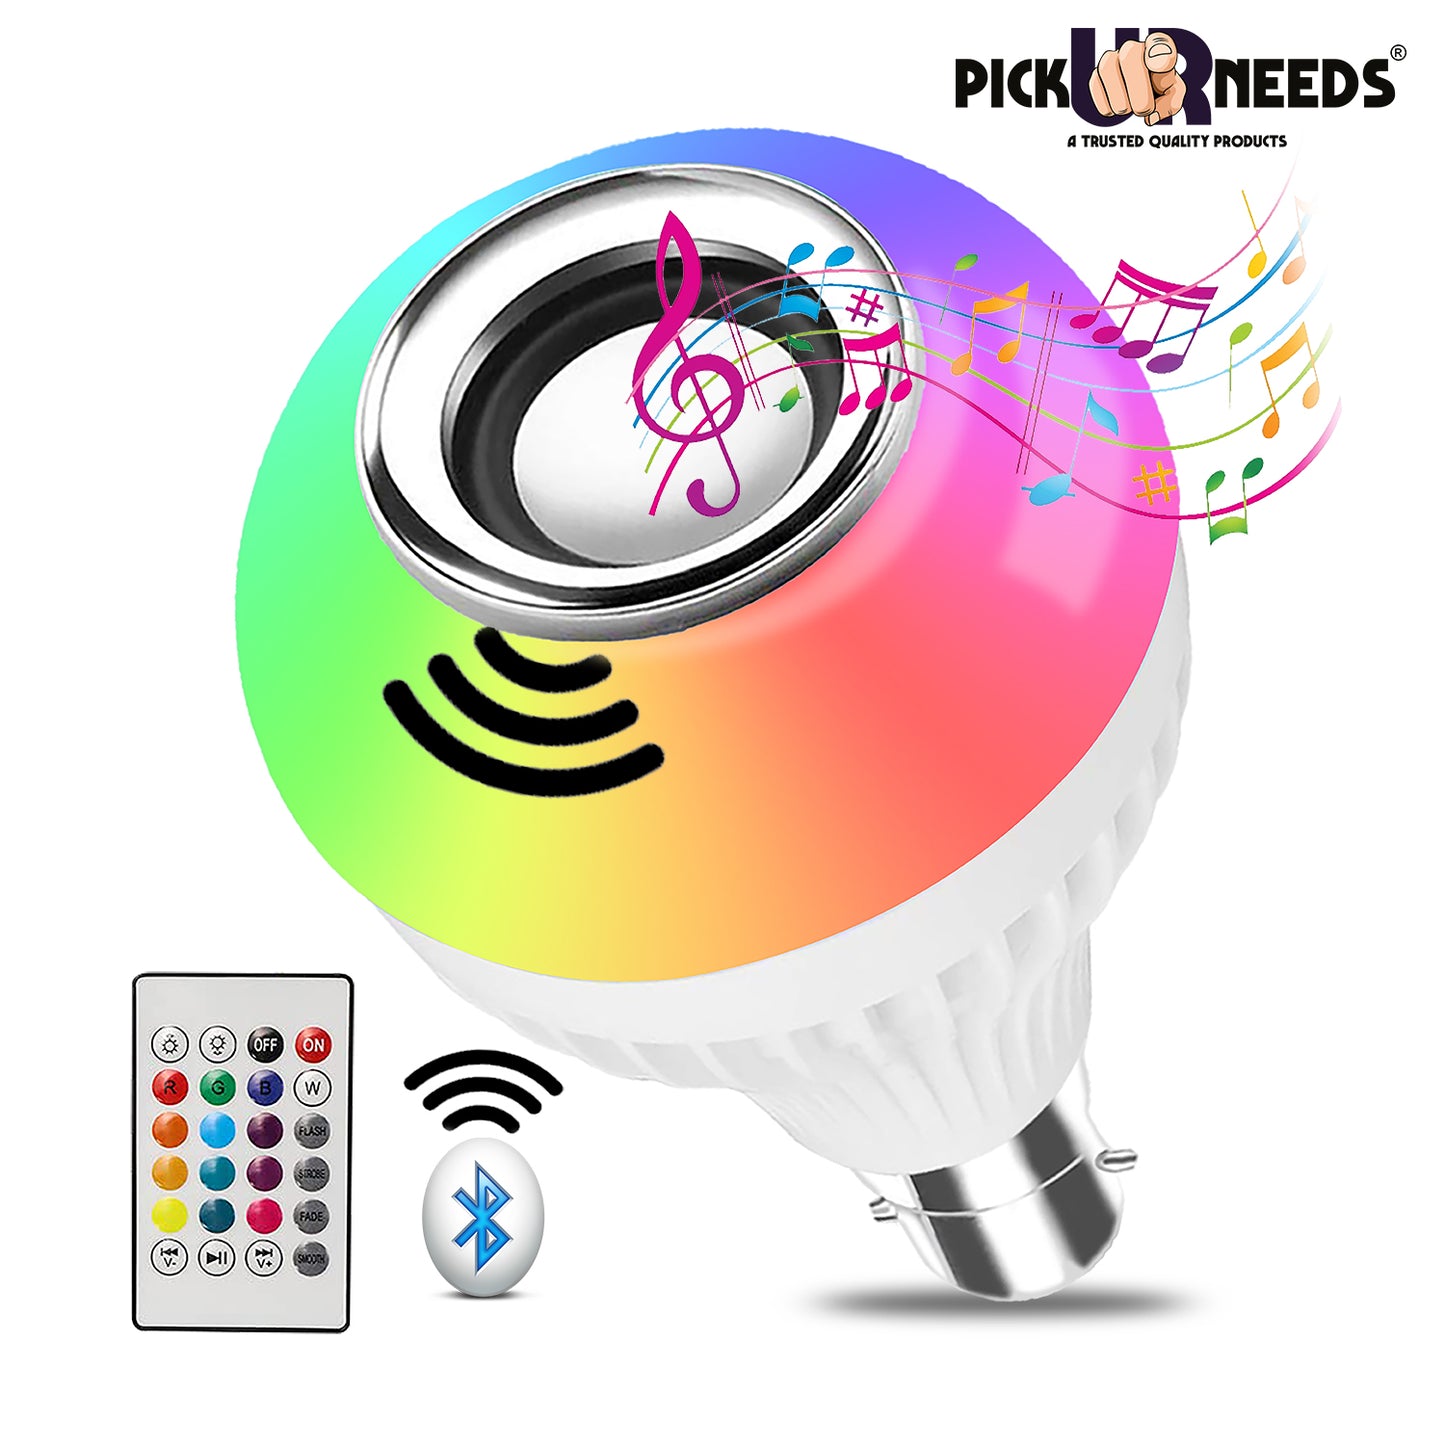 Pick Ur Needs Smart Lighting Music Bulb with Bluetooth Speaker Color Changing , DJ Lights with Remote Control